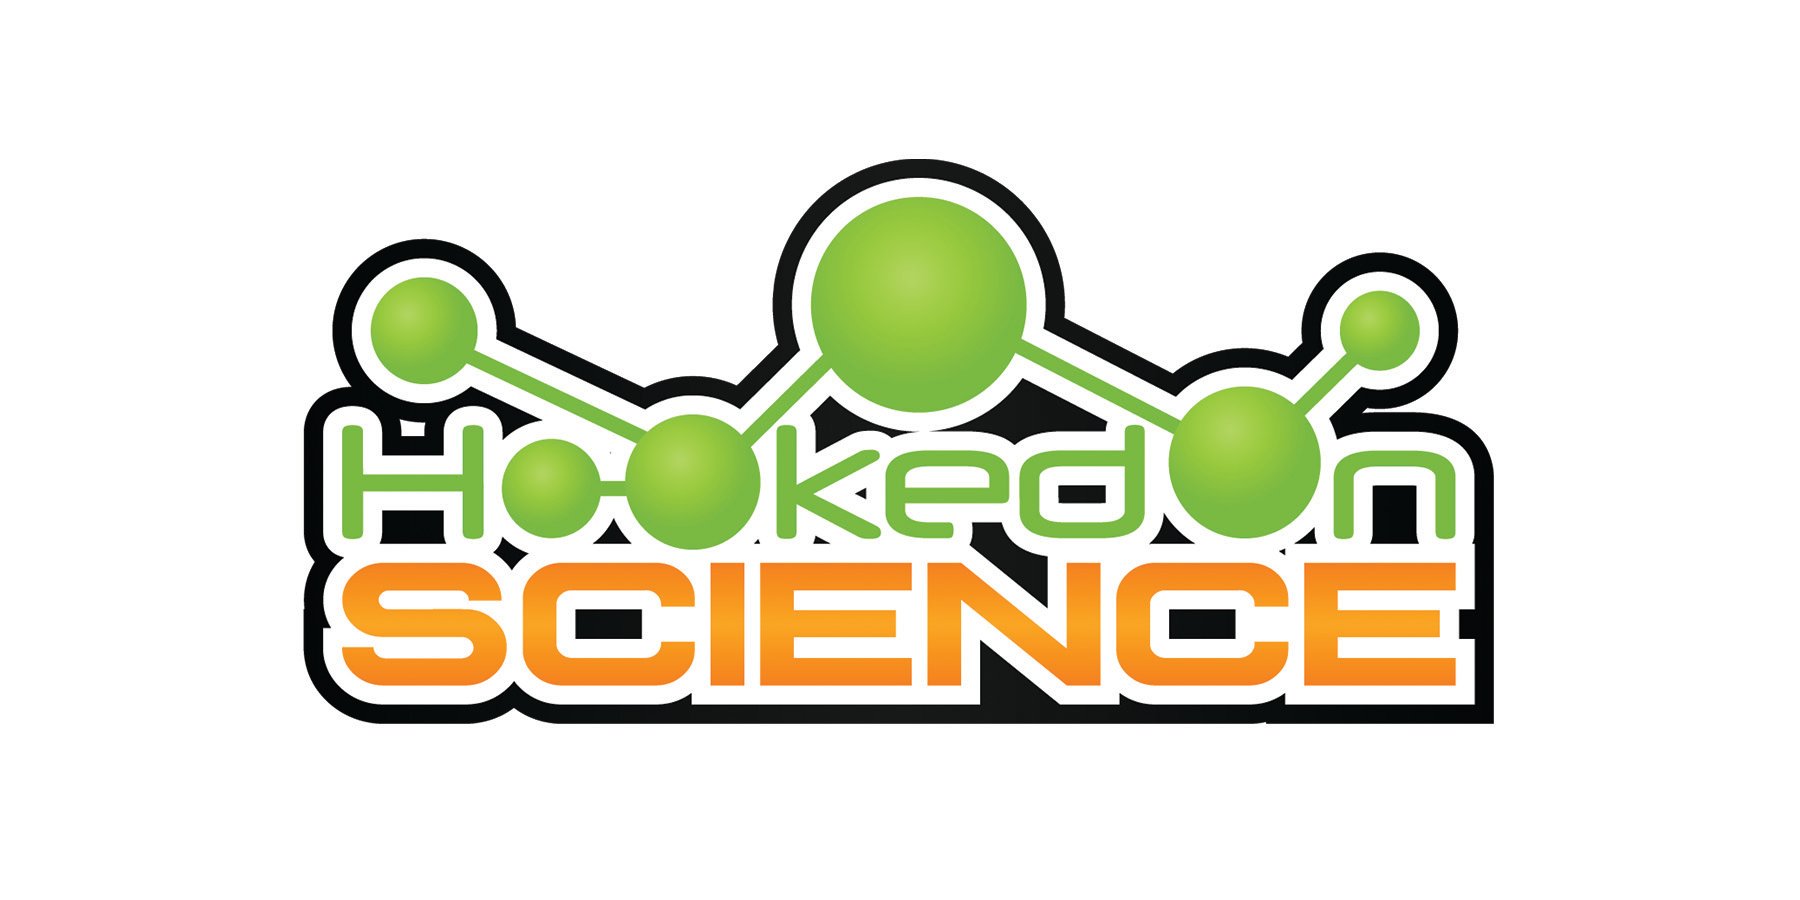 Hooked On Science